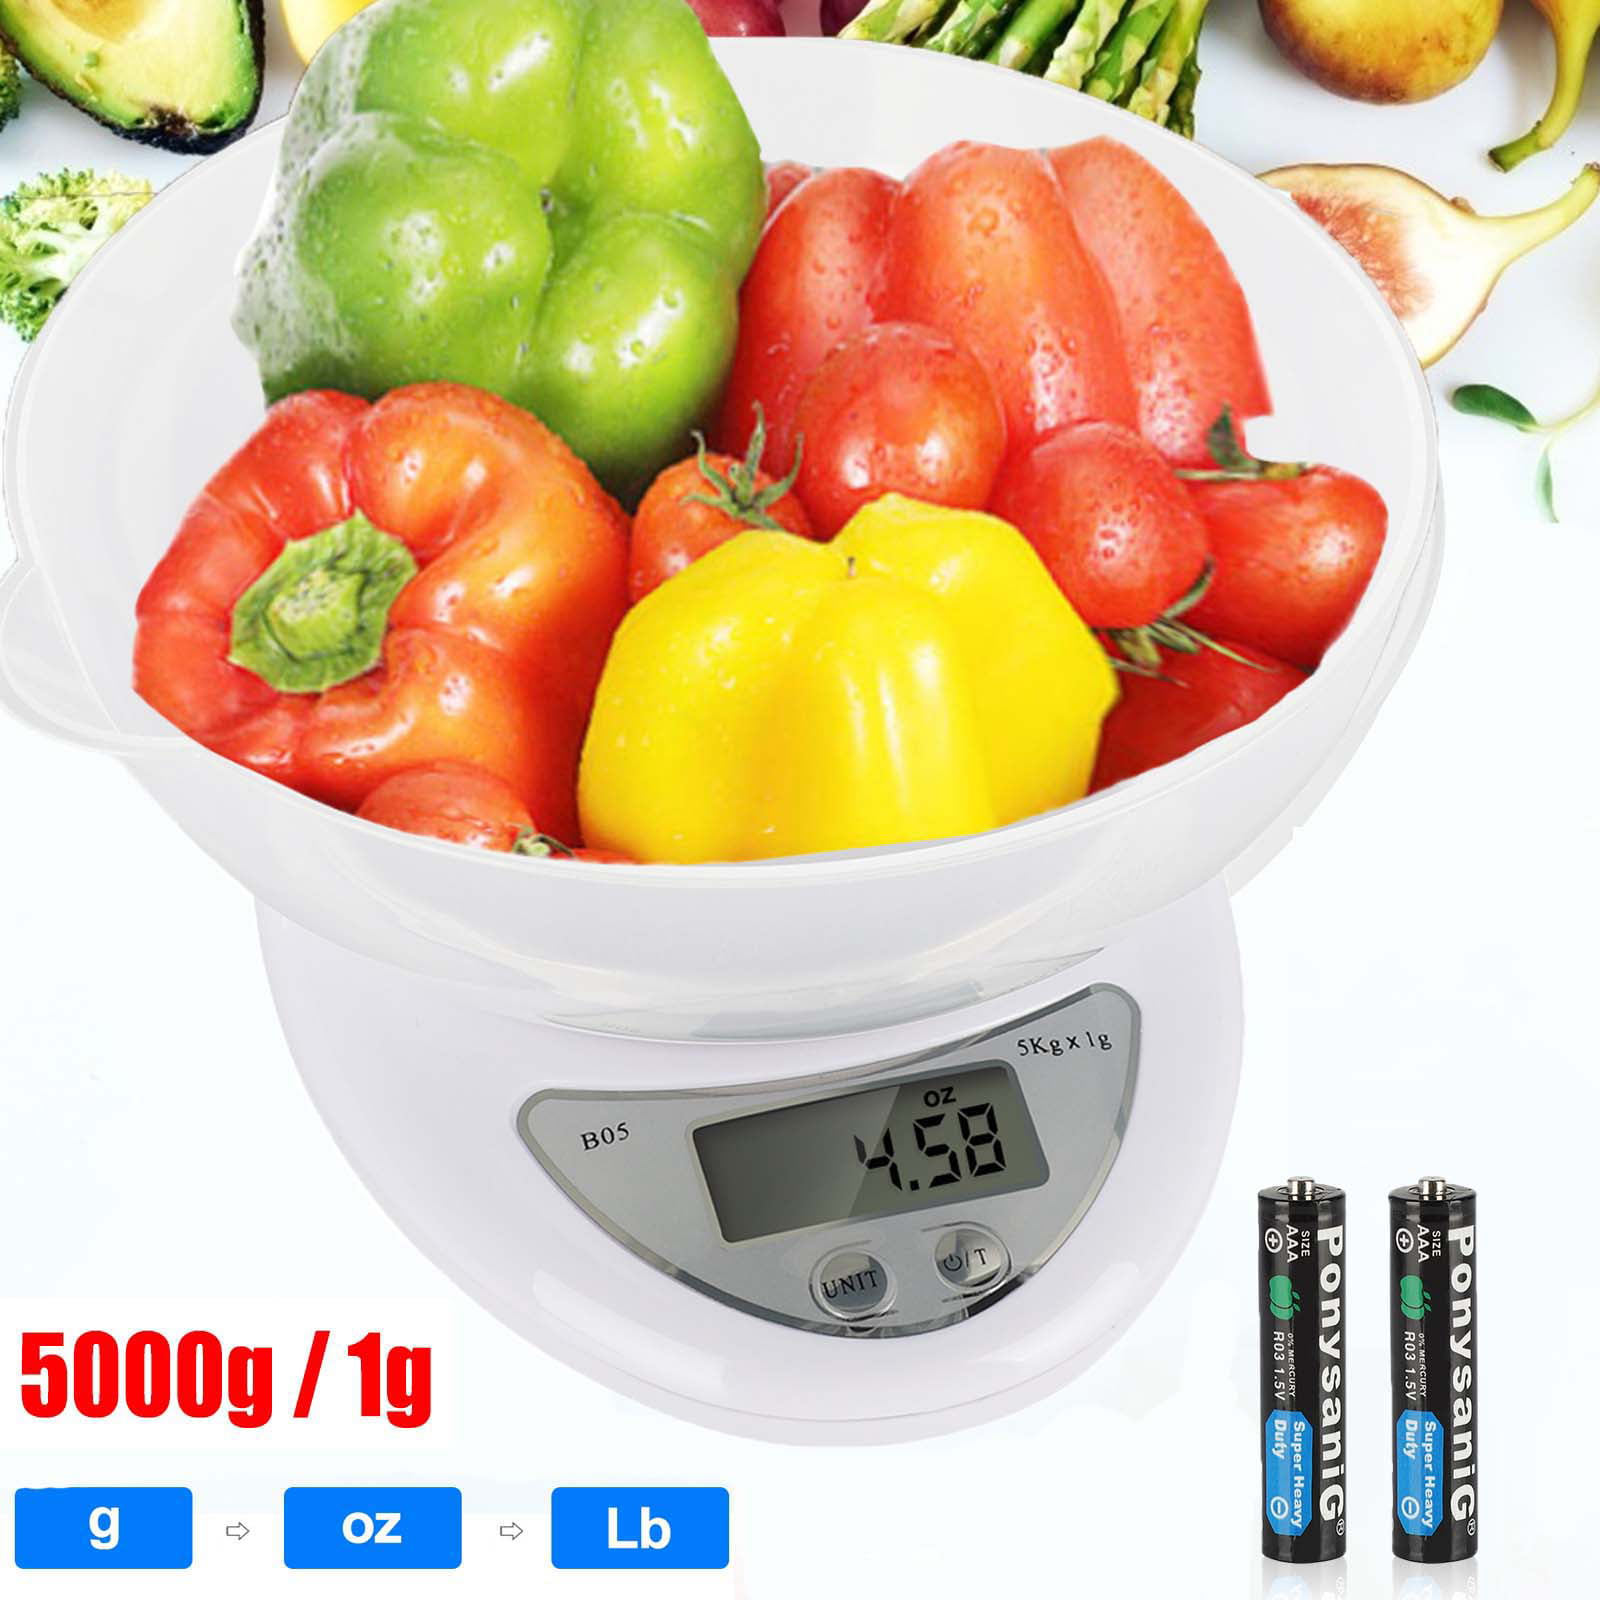 5Kg/1g Accurate Digital Kitchen Food Scale Gram Electronic Baking with Battery 